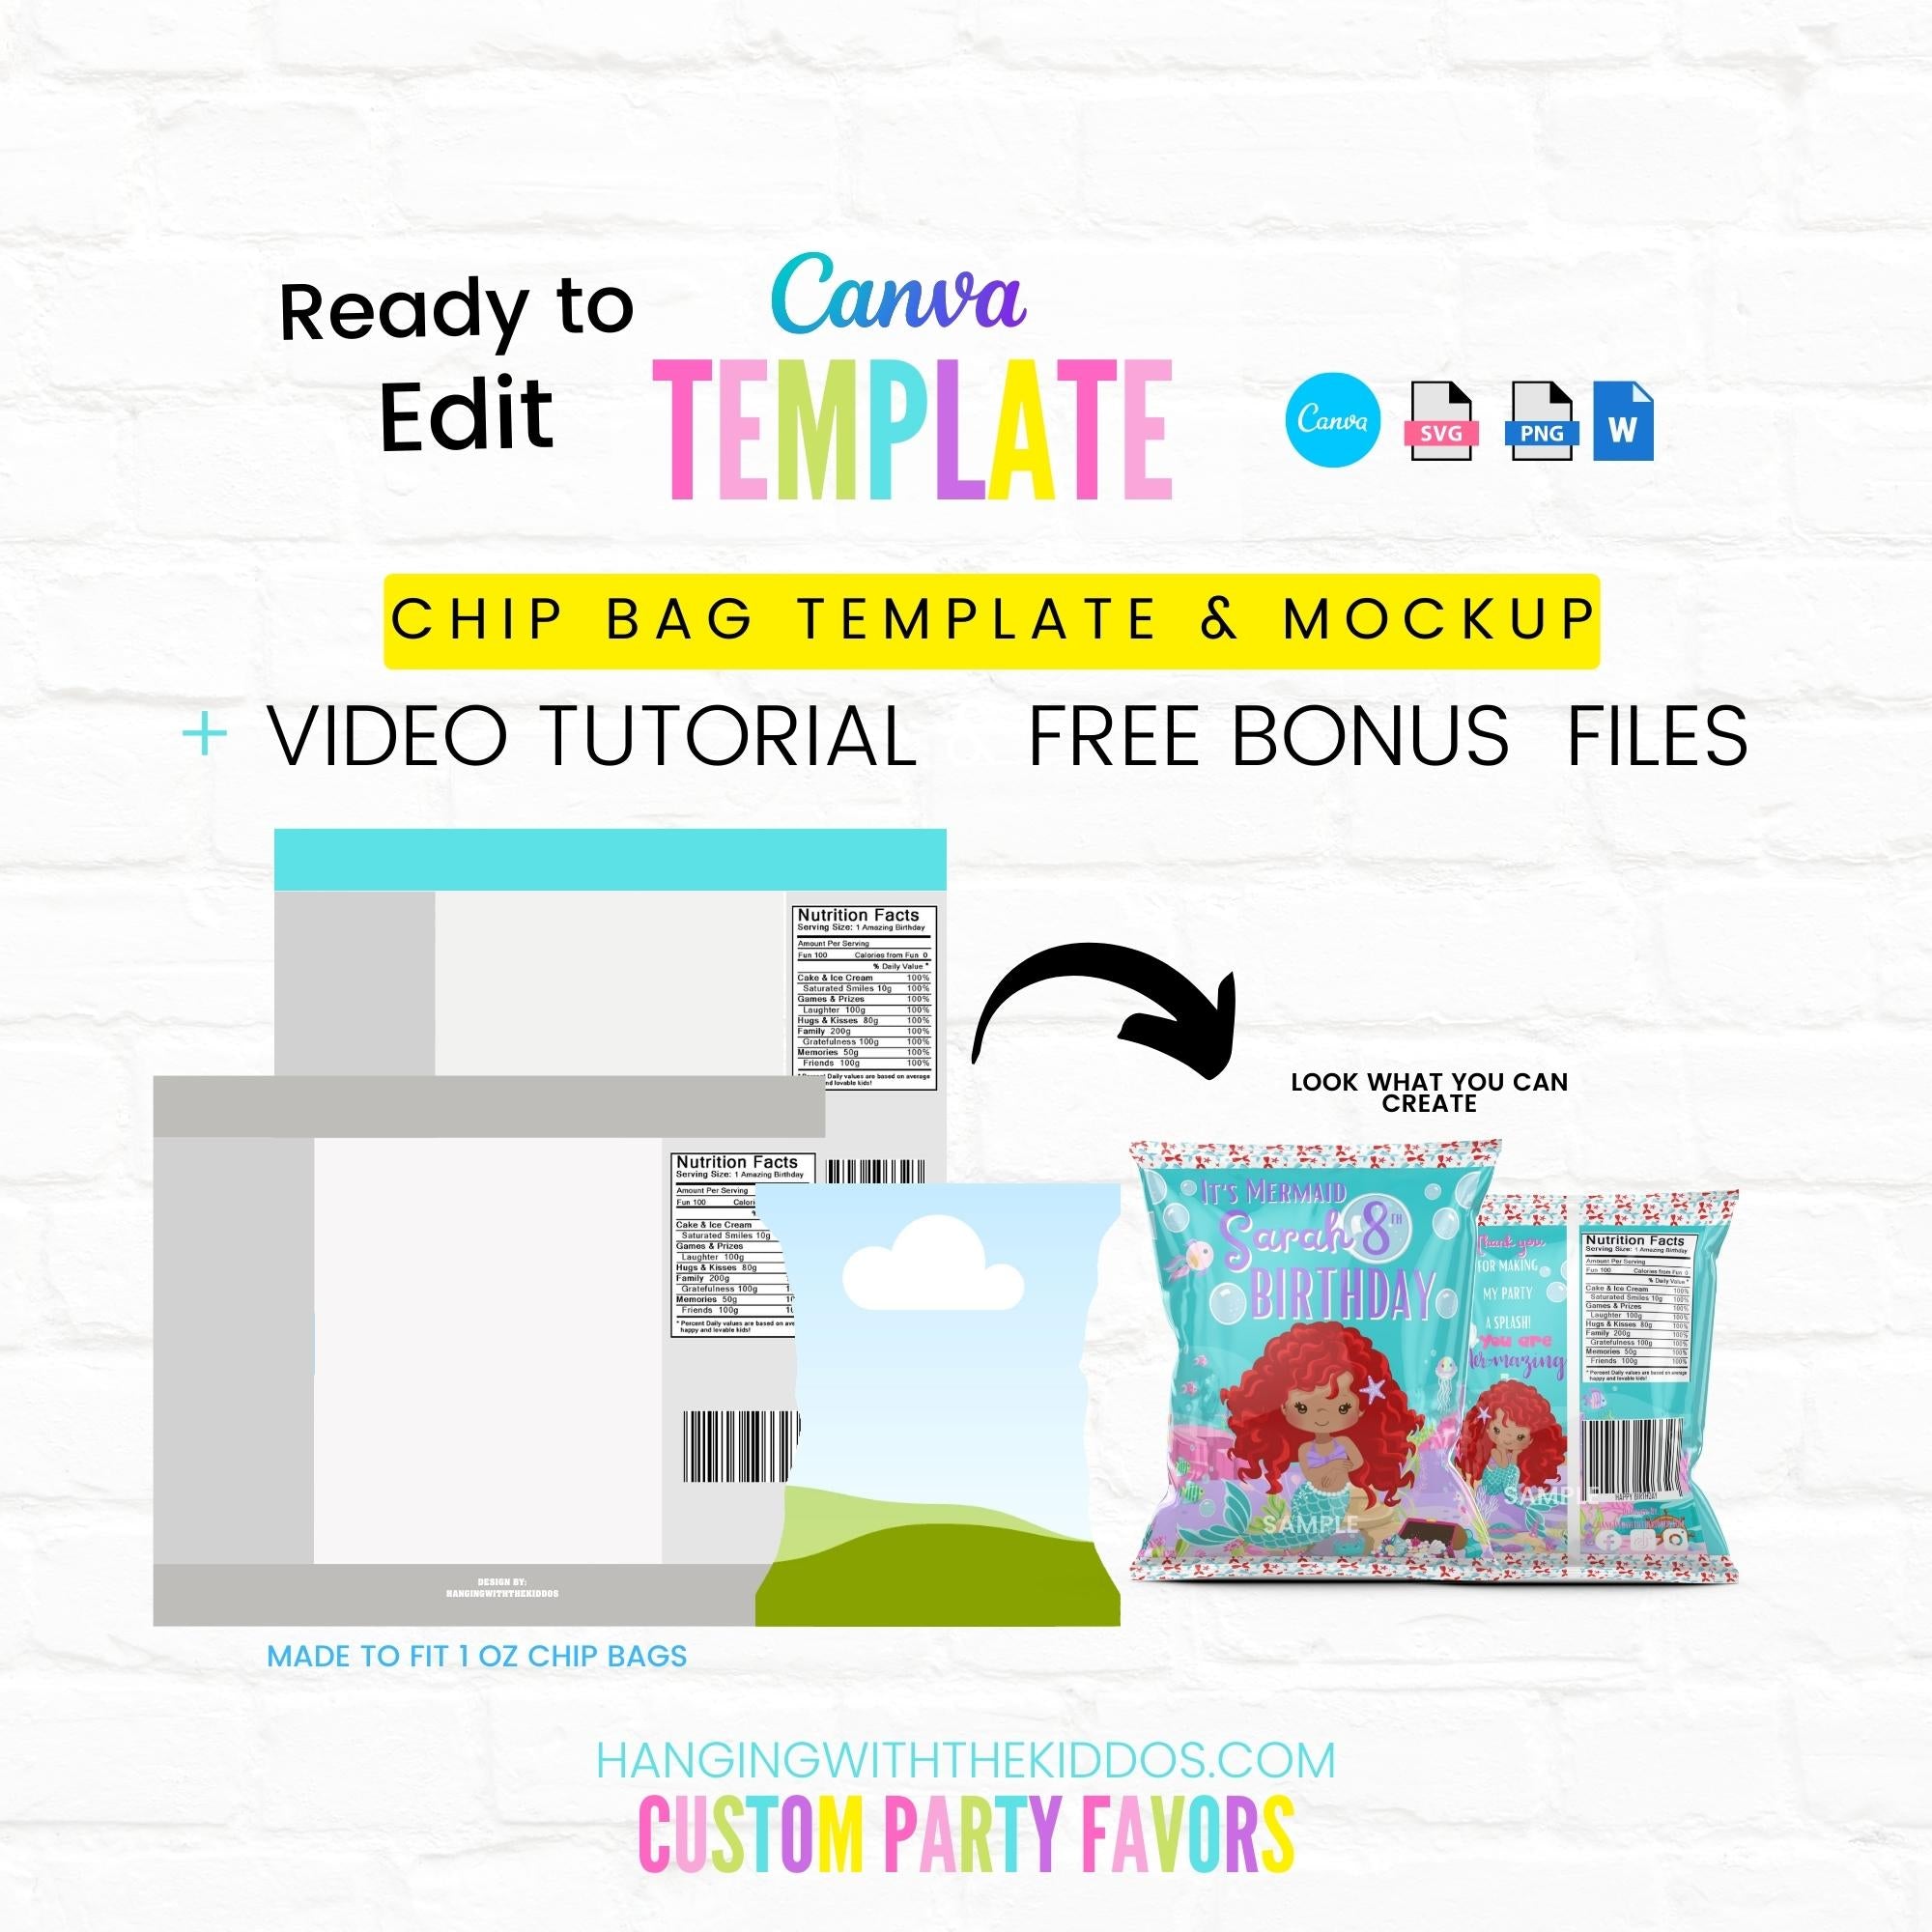 How To Design A Personalized Chip Bag Template in Microsoft Word